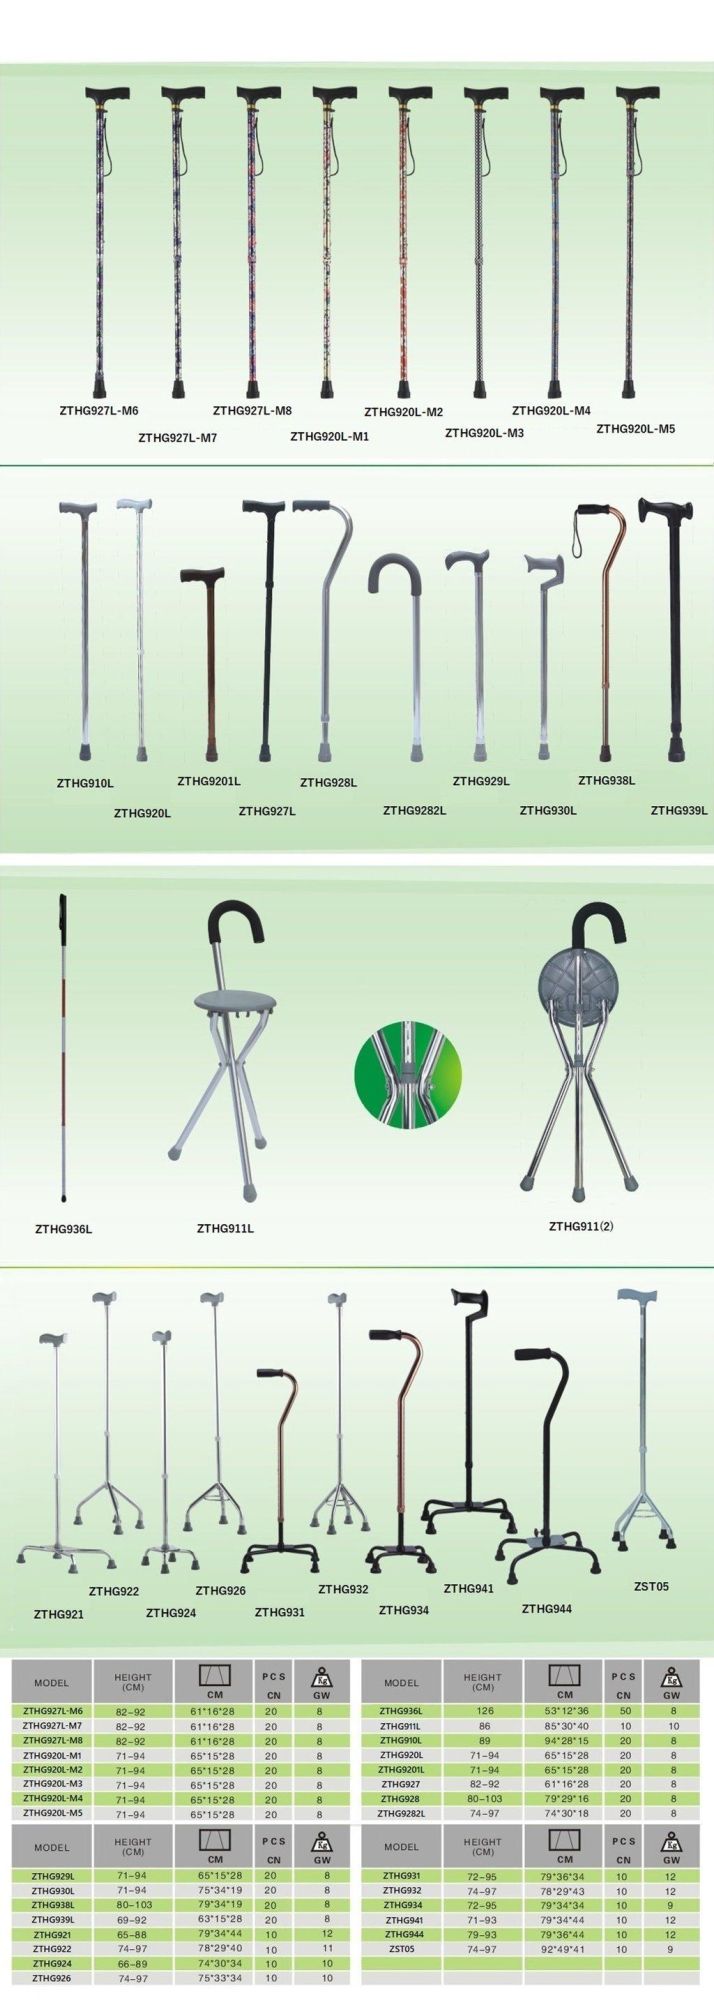 Four Legs Offset Handle Quad Crutch Colorful Lightweight Adjustable Height Strong Safety Walking Stick for Disabled/Elderly People Outdoor Steel Product